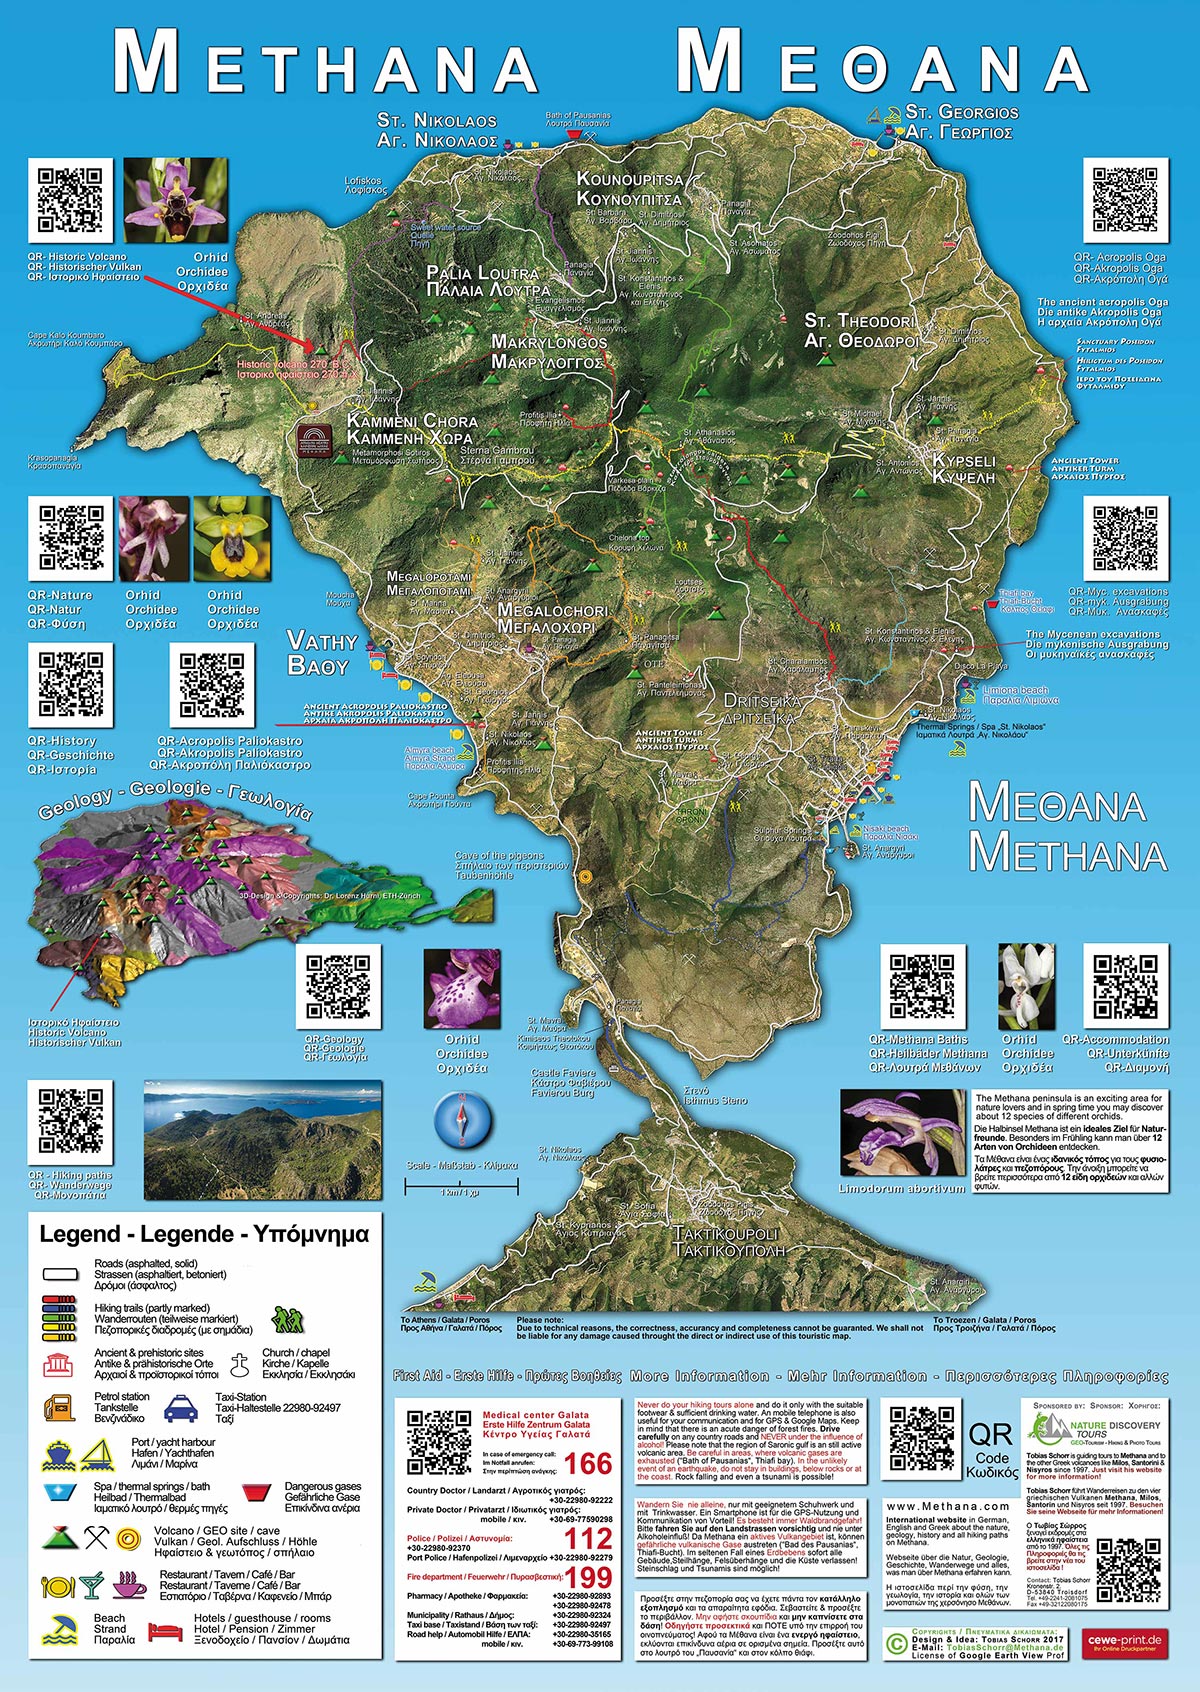 Methana-Tourist map 2017 by (c) Tobias Schorr (if you click on the image, you get the PDF-File as download!)